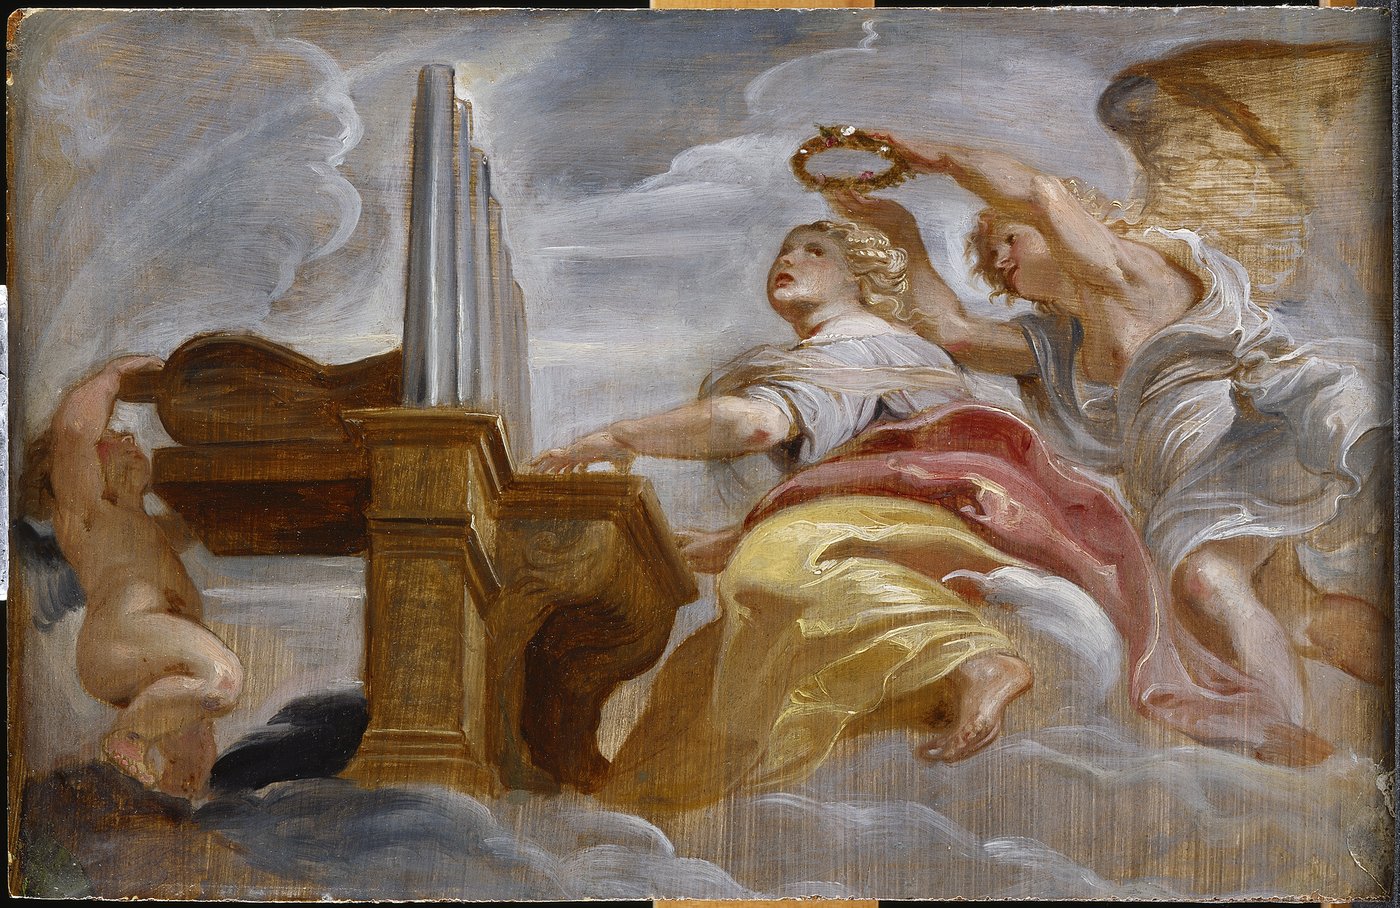 The landscape-format painting depicts Saint Cecilia playing the organ with two angels. Due to the strong worm's eye view, the impression is created that one is looking at the scene from below. One of the angels is standing behind Saint Cecilia and holds a wreath of flowers over her head. The scene is embedded in clouds. On the left side of the painting is a small putto reaching up towards the back of the organ. The brushstrokes appear sketchy and in places the wood on which the picture was painted shimmers out. The picture appears dynamic due to the fluttering voluminous robe and the many folds of fabric as well as cloud formations.